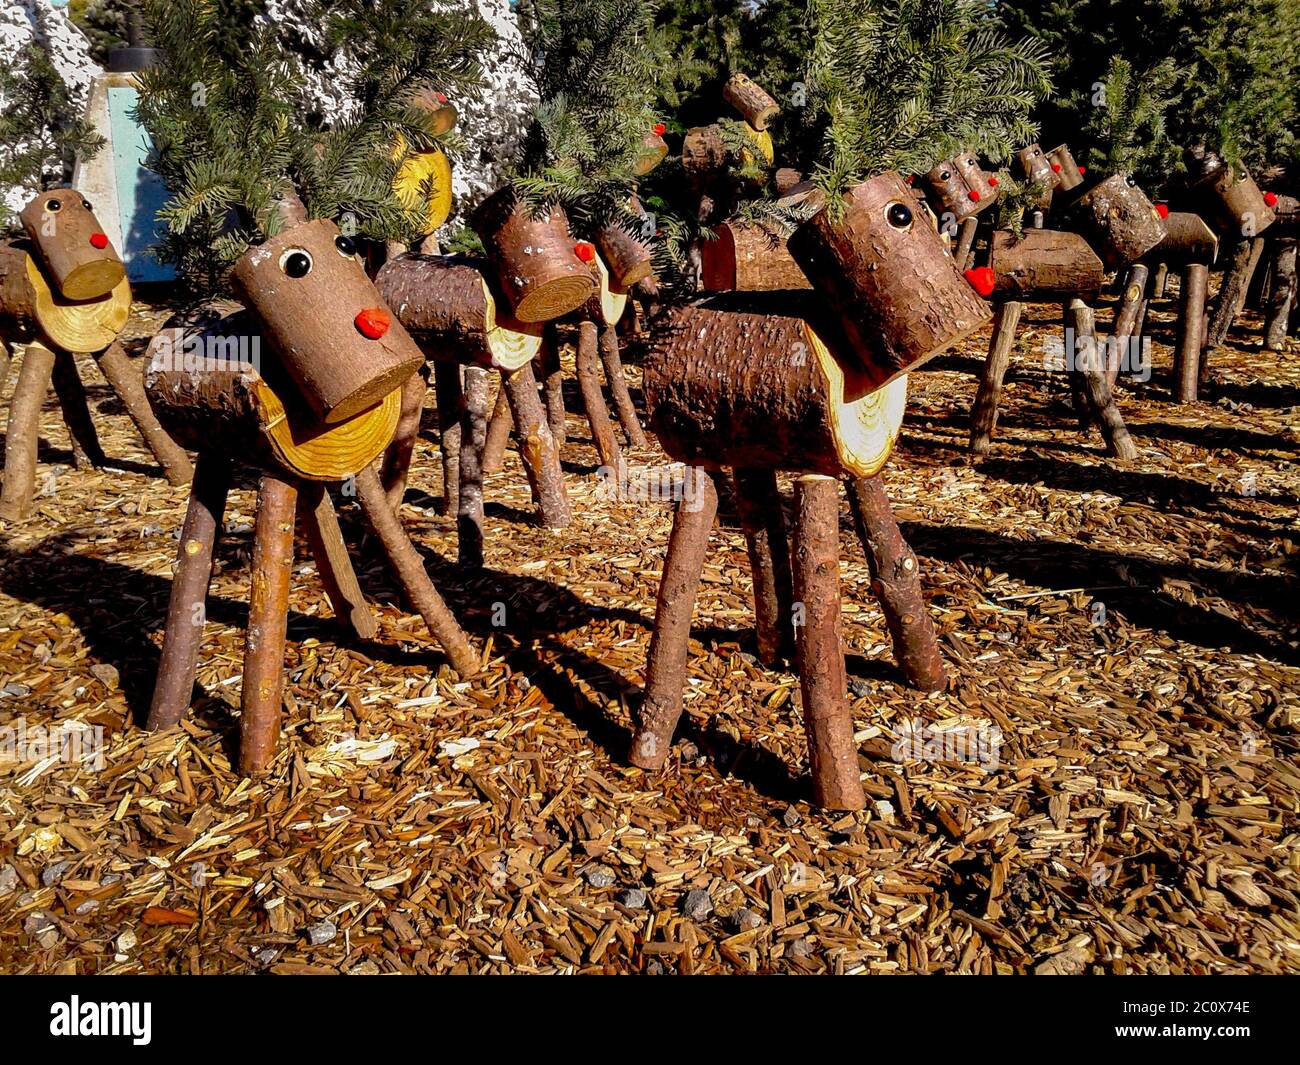 Wooden models of Rudolph the Red Nosed Reindeer made from sawn logs are for sale at Christmas time in Laguna Niguel, CA. Stock Photo